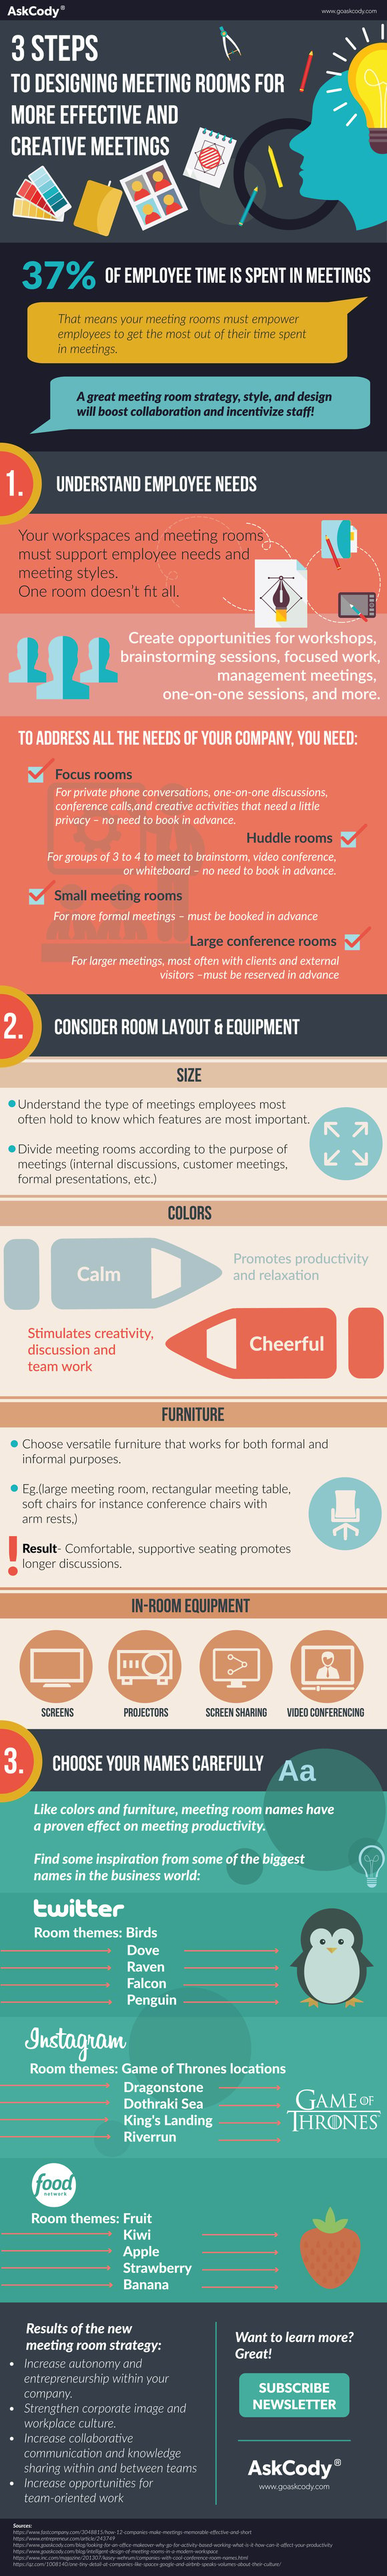 3 steps to designing meeting rooms - infographic